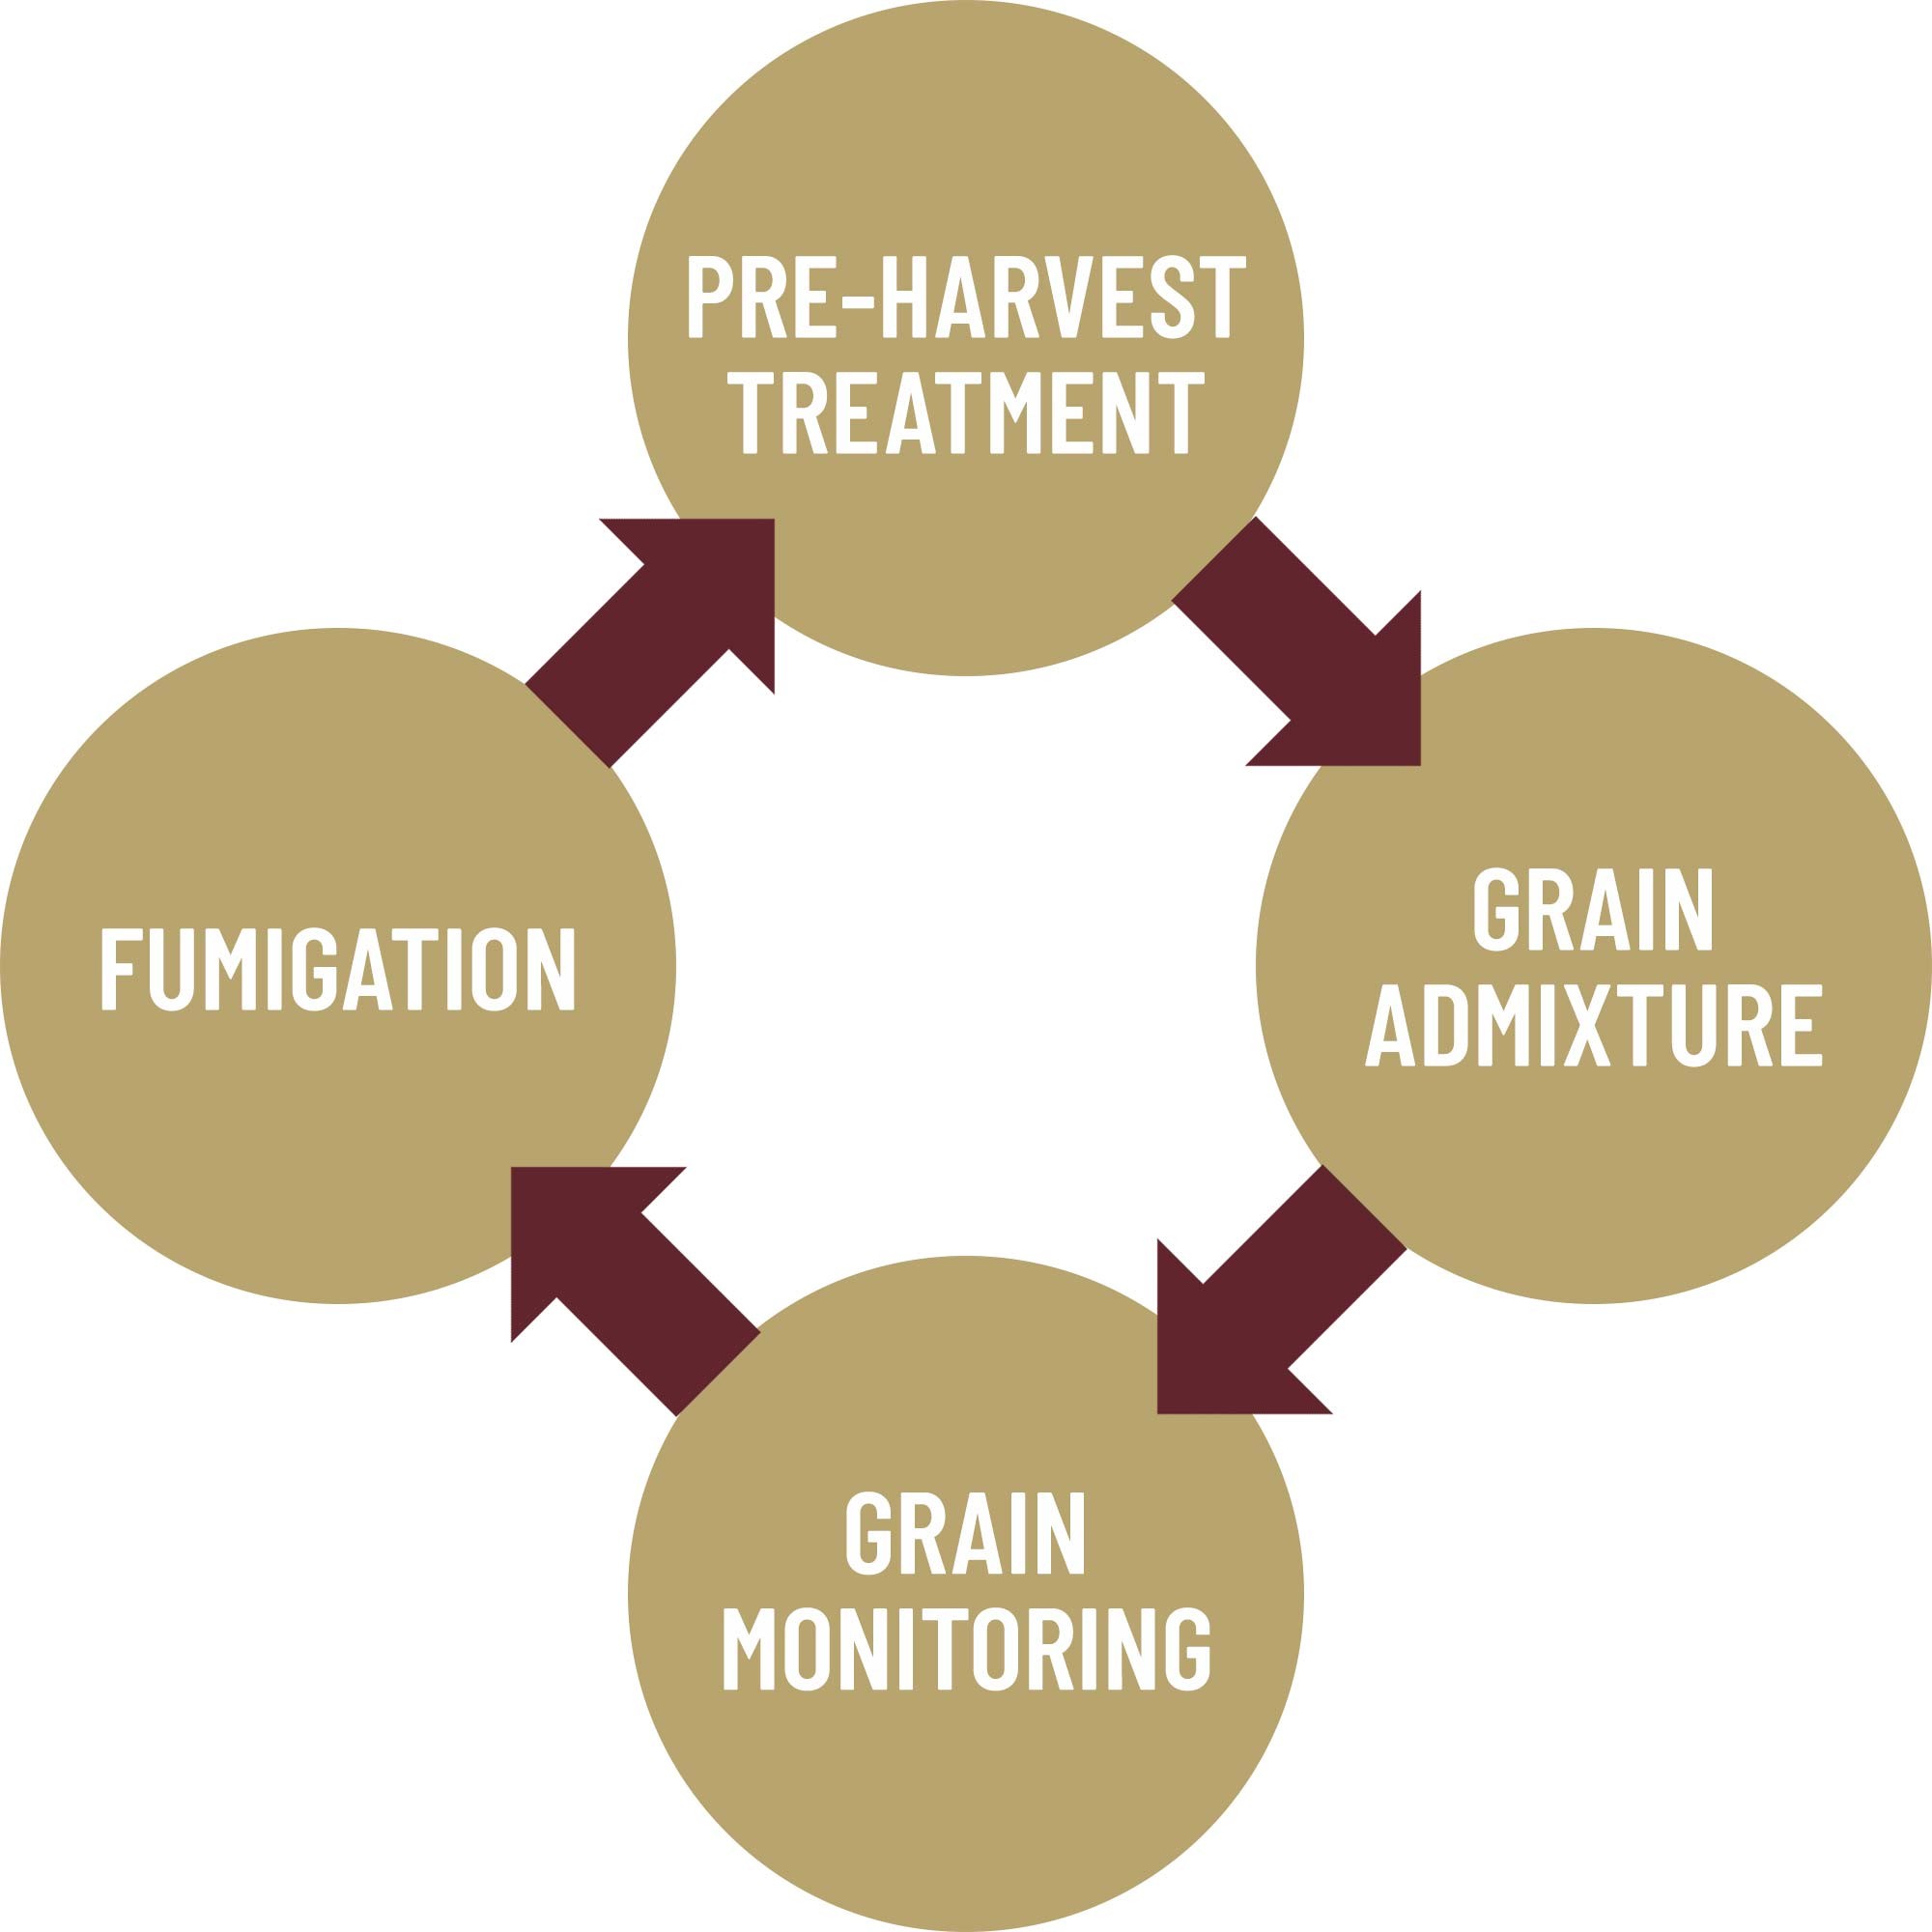 Grain Care for all parts of the storage cycle